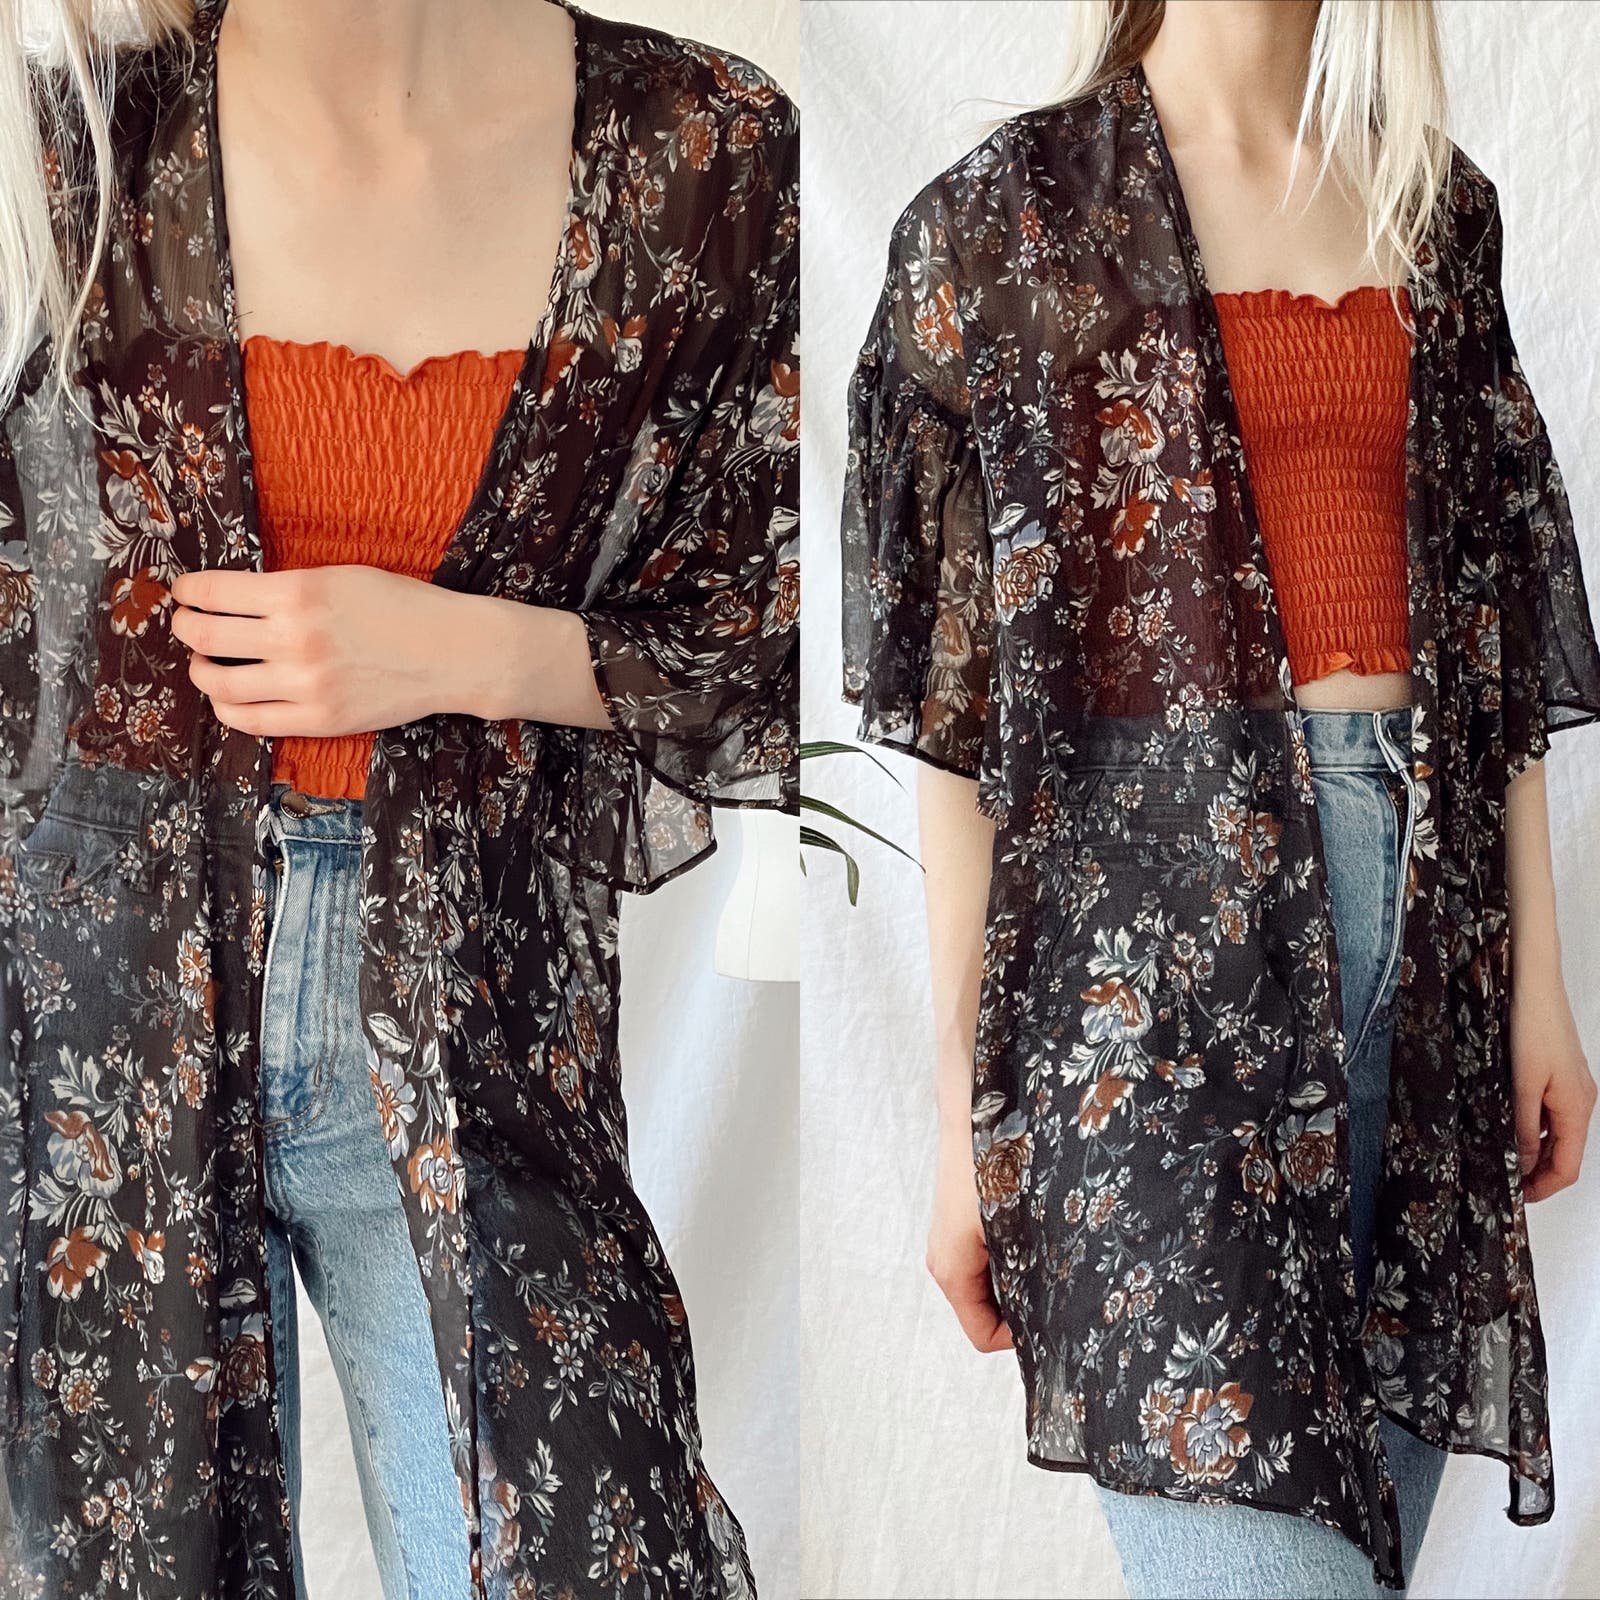 cheapest place to buy  American Eagle Floral Flutter Sleeve Kimono Sheer XS Small JwnpgSXGb Wholesale